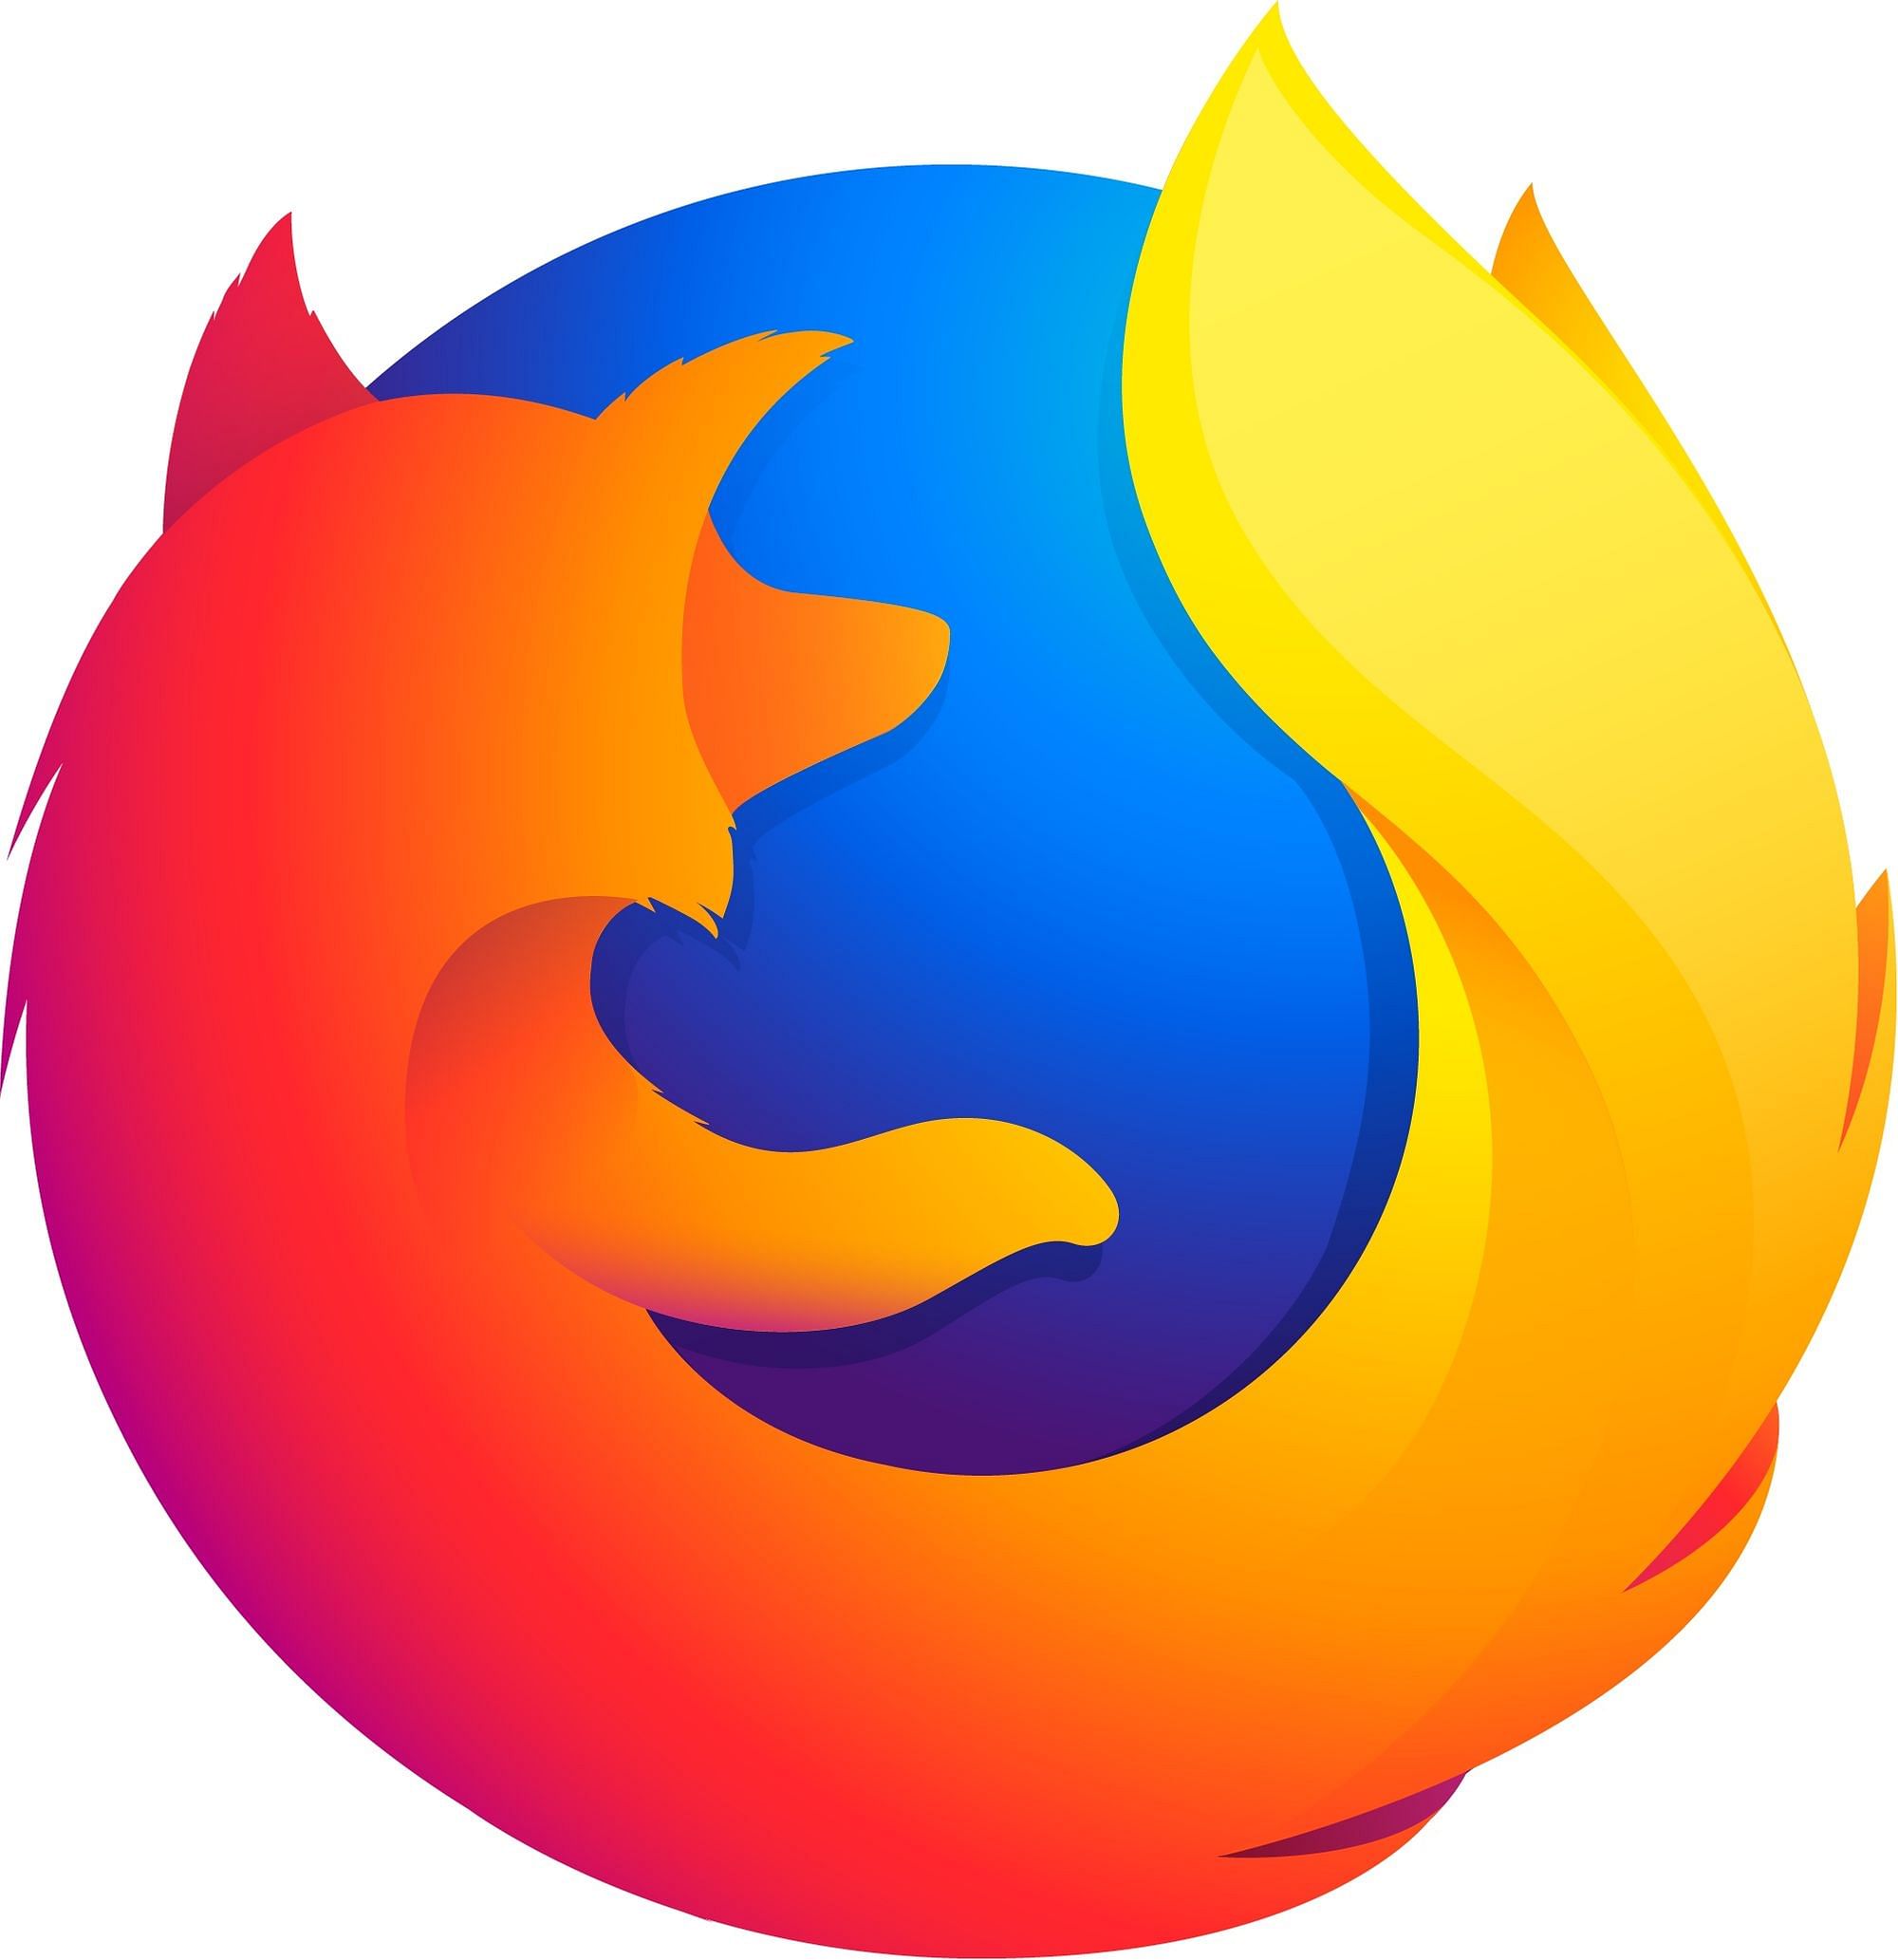 WebP is now supported in Firefox 65 and Microsoft Edge